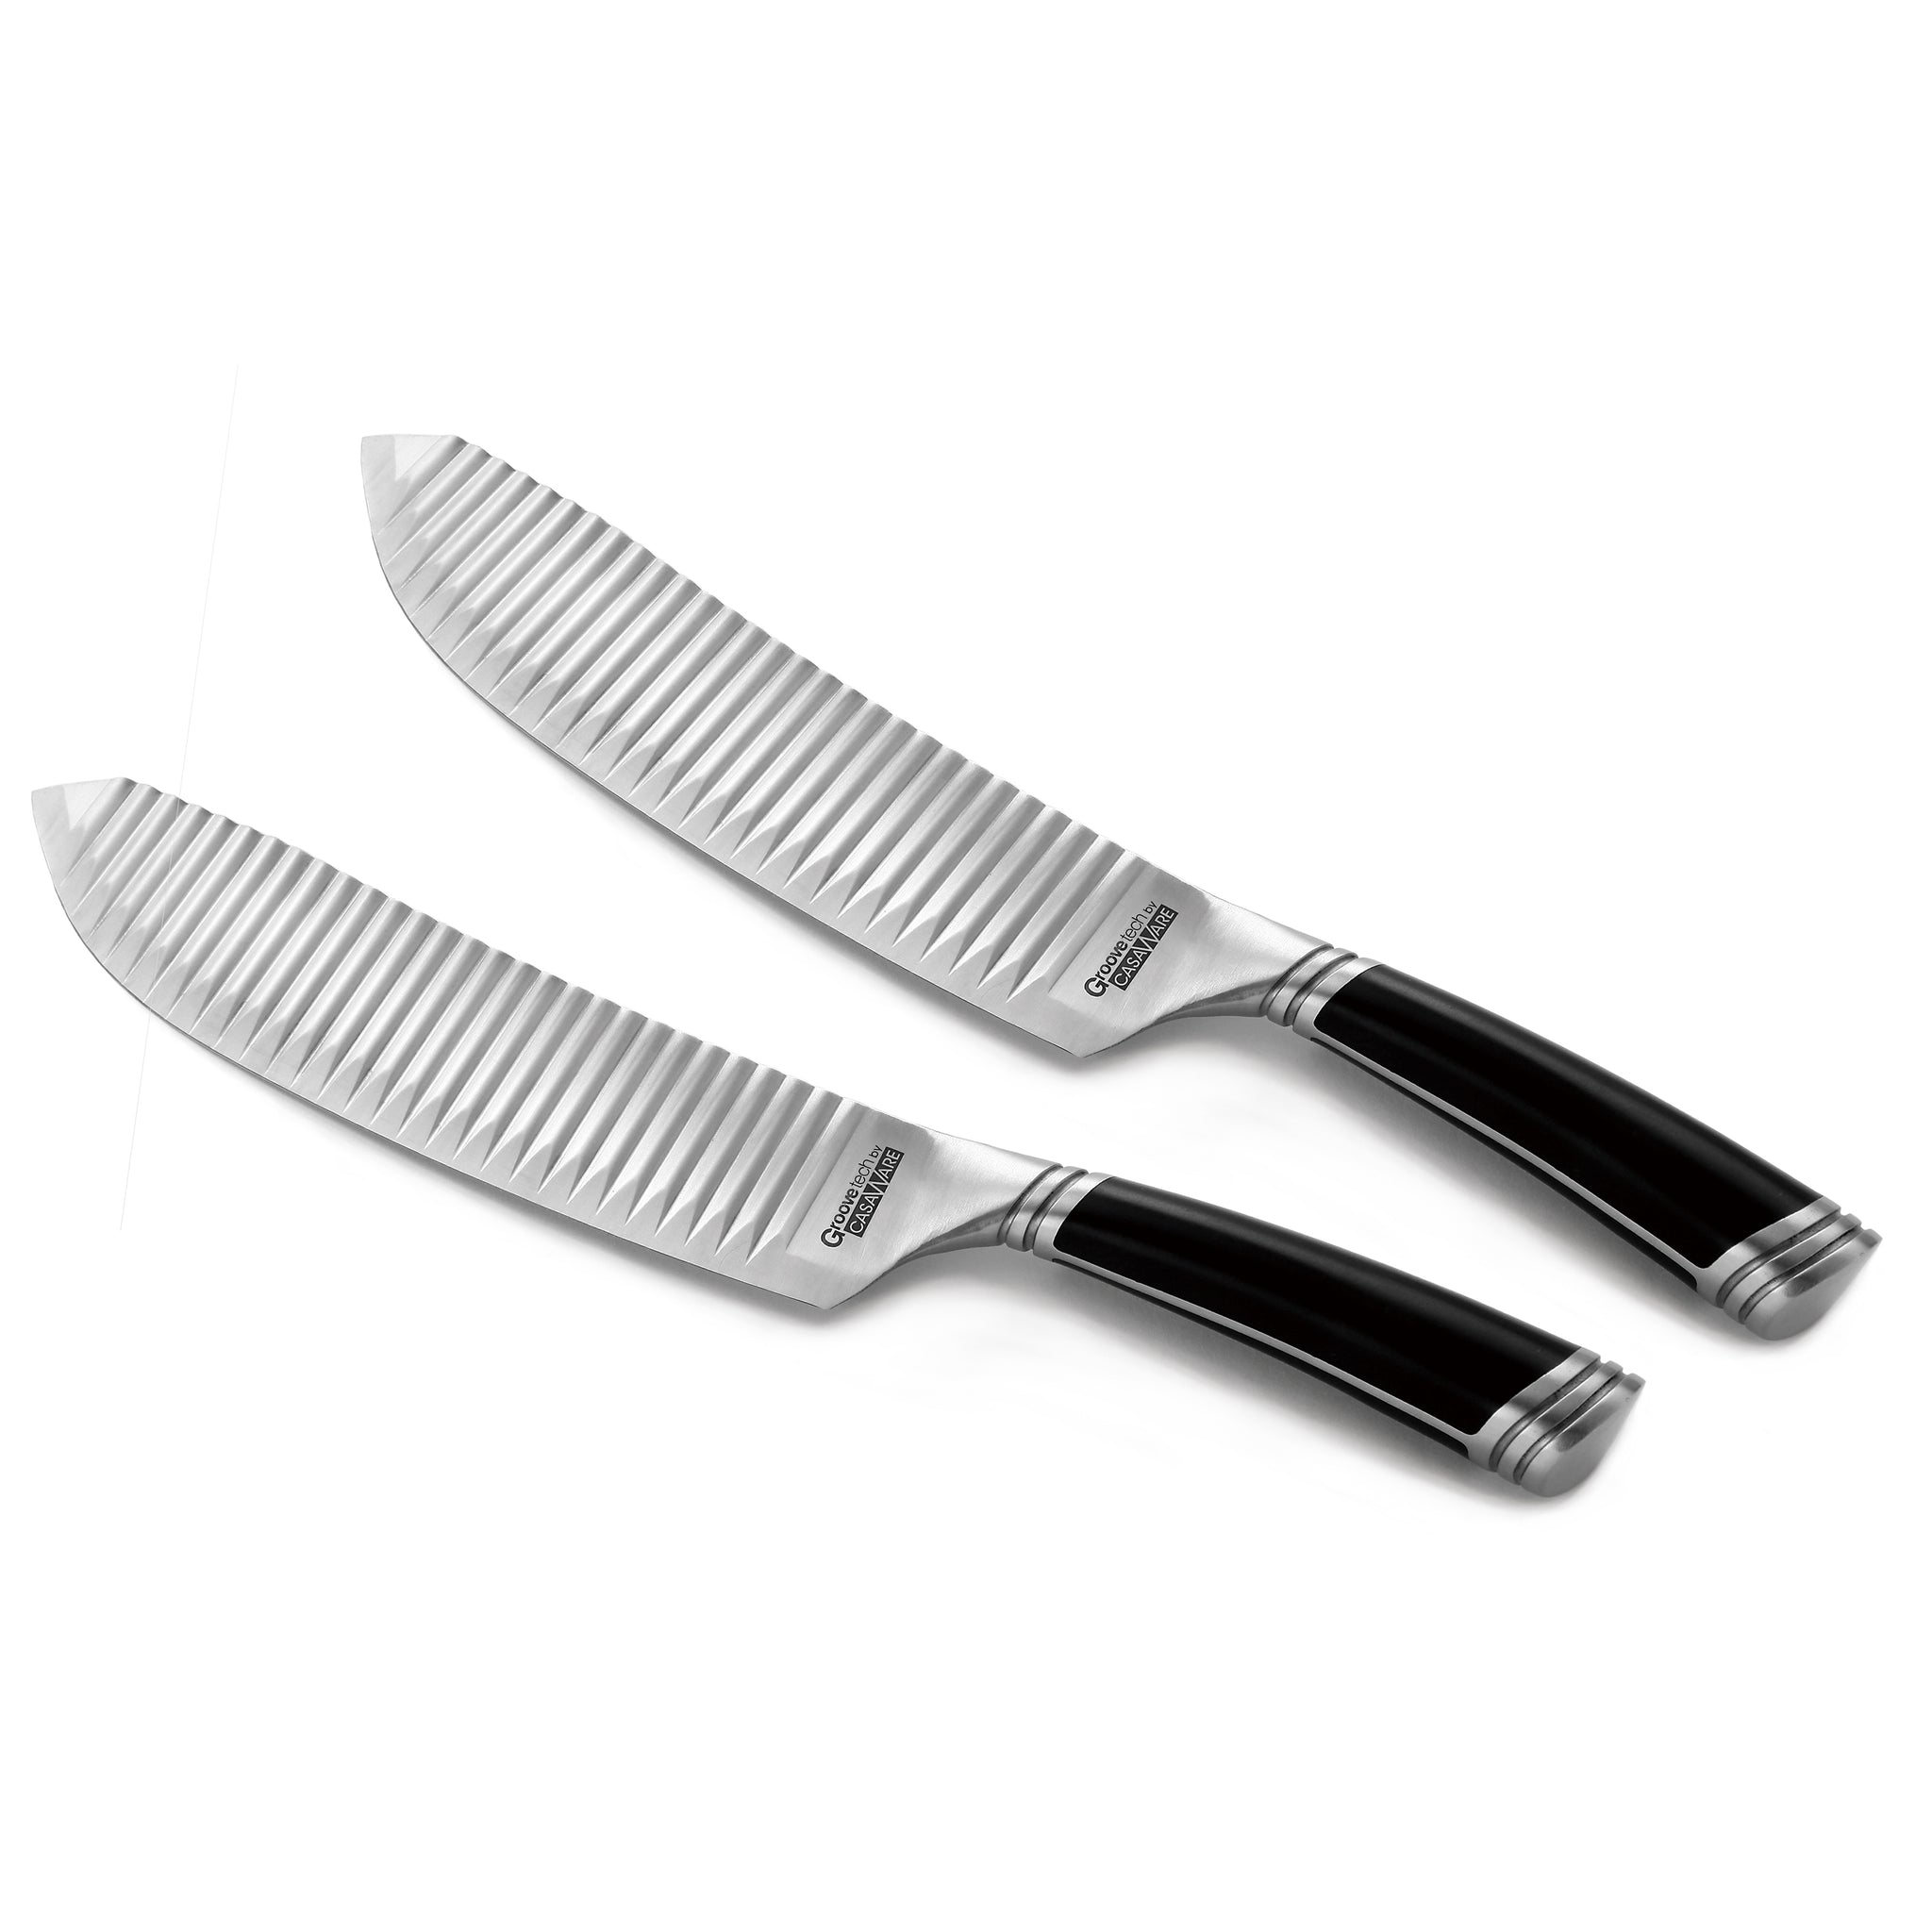 Stainless Steel Non-serrated Utility Knife and Paring Knife 2pc